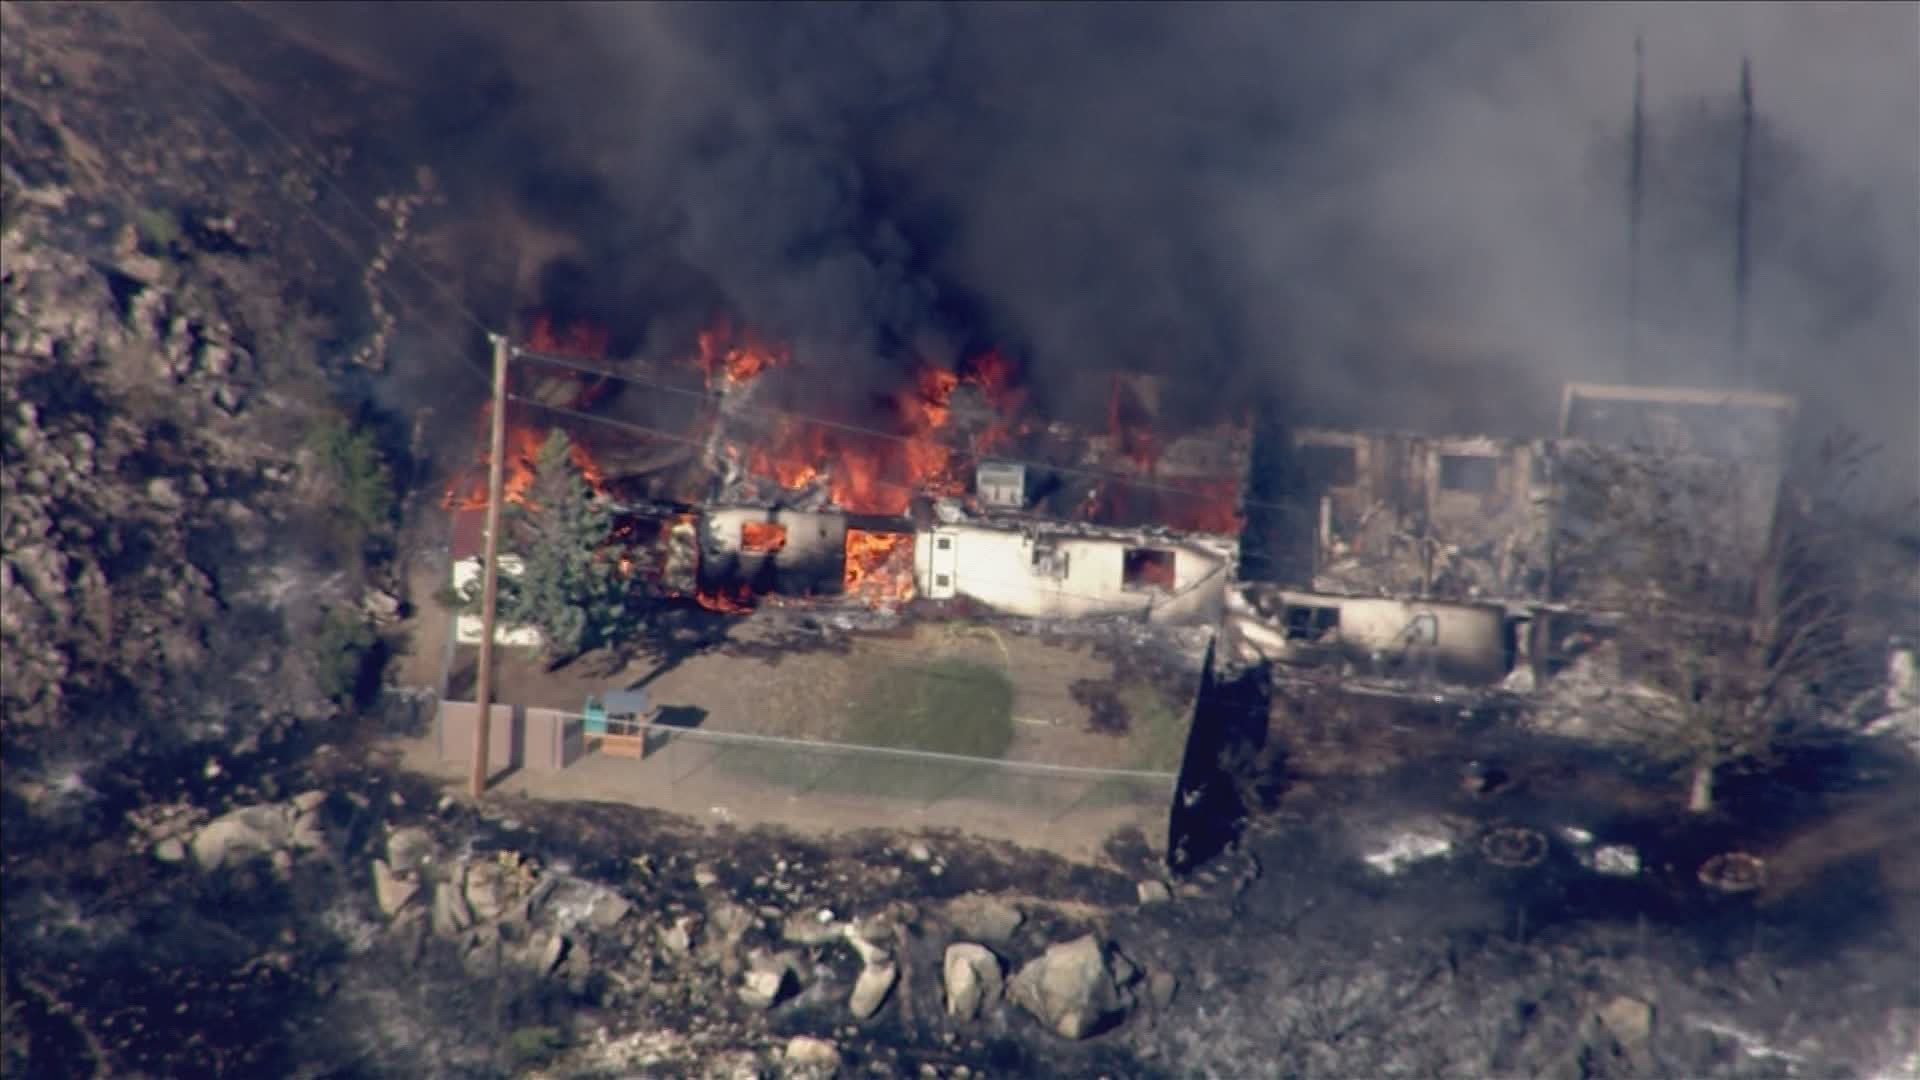 Sky 12 is over the Spur Fire in Bagdad northwest of Phoenix. Evacuations have been ordered for some areas.